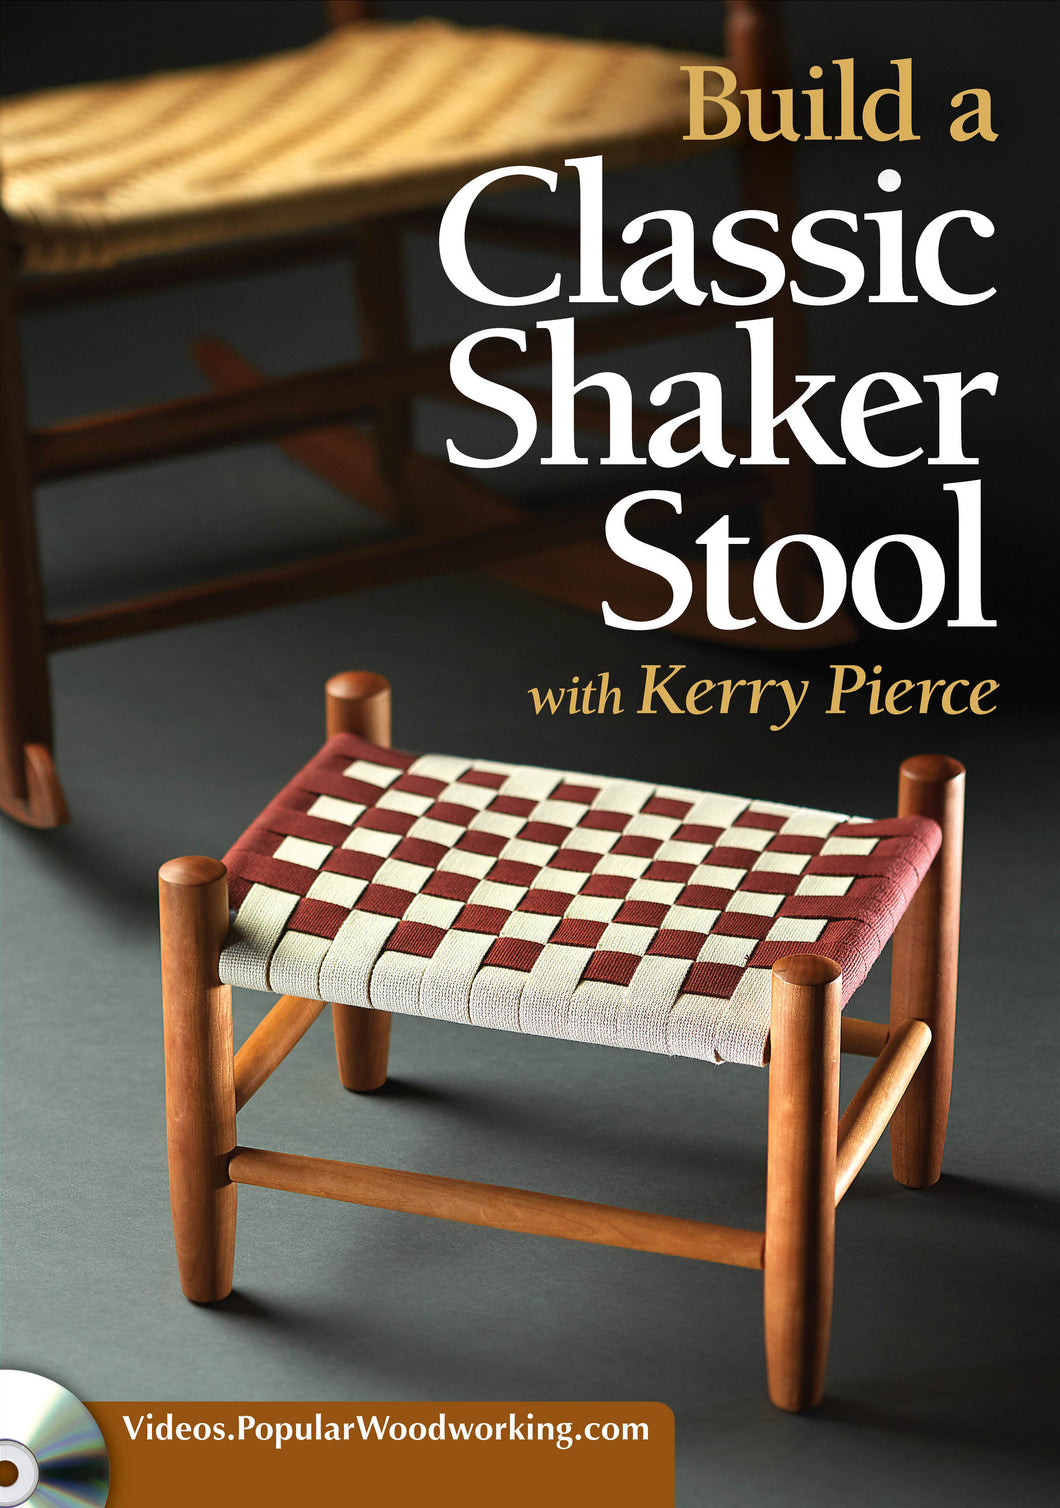 Build a Classic Shaker Stool Video Download